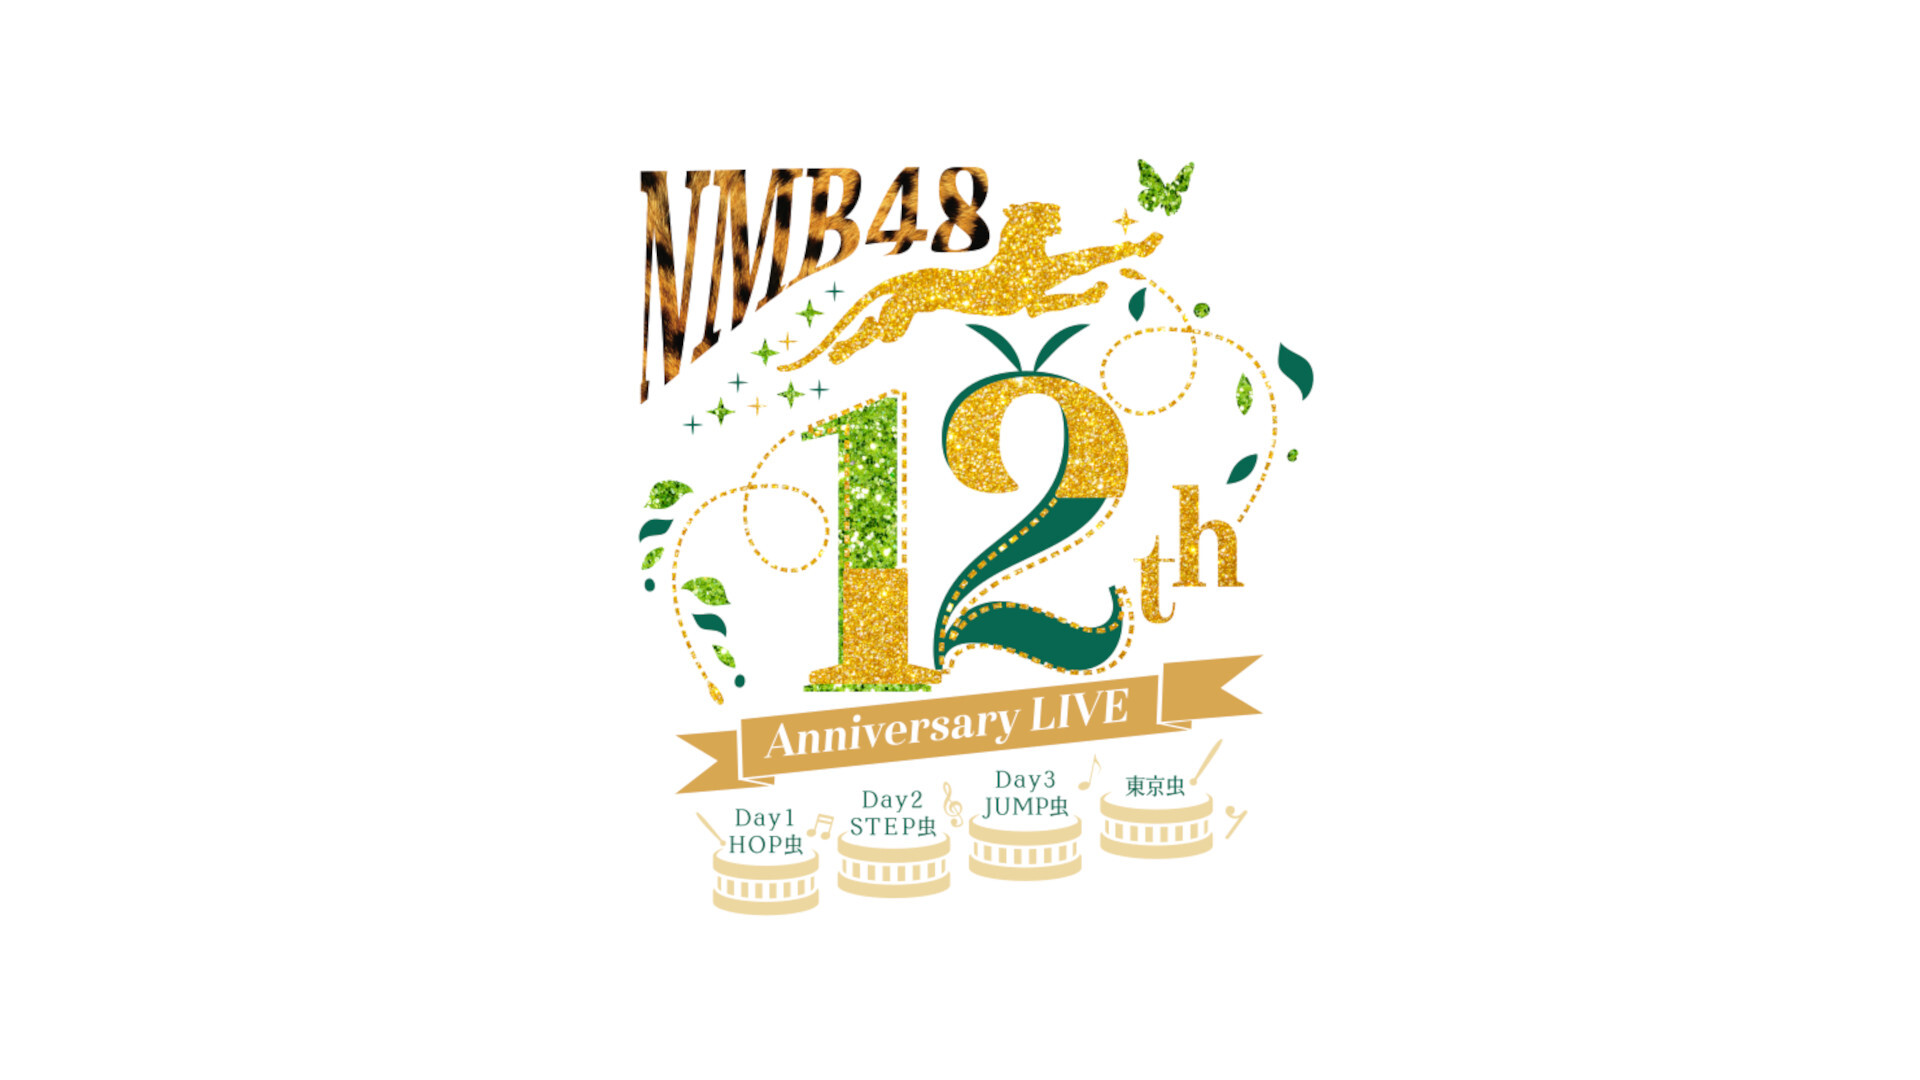 NMB48 12th Anniversary LIVE Day1 HOP虫